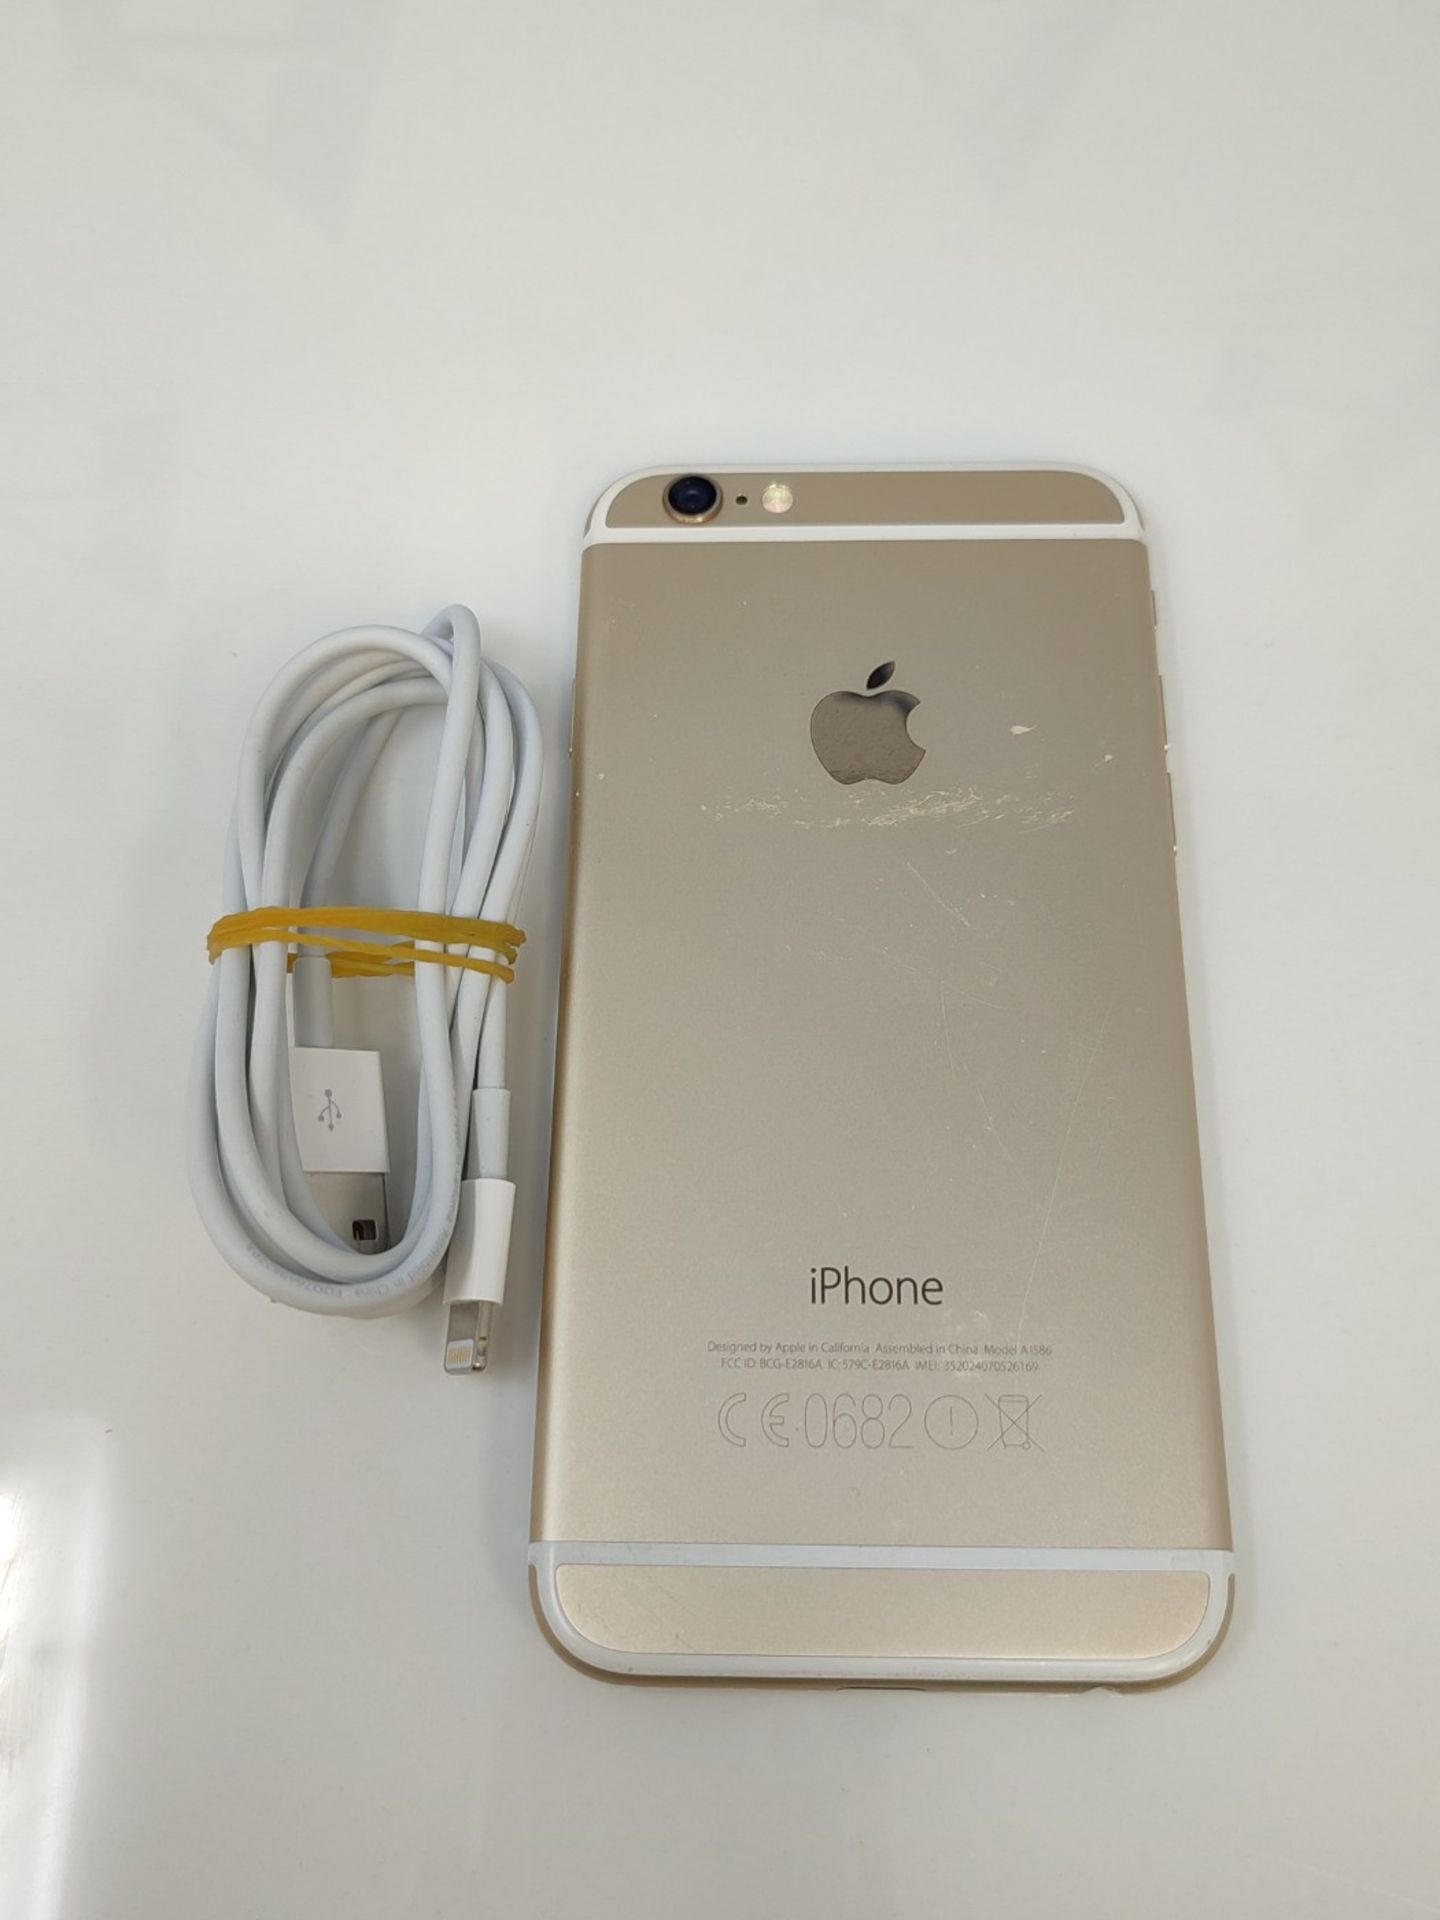 Apple iPhone 6, 16GB , Gold - Image 2 of 2